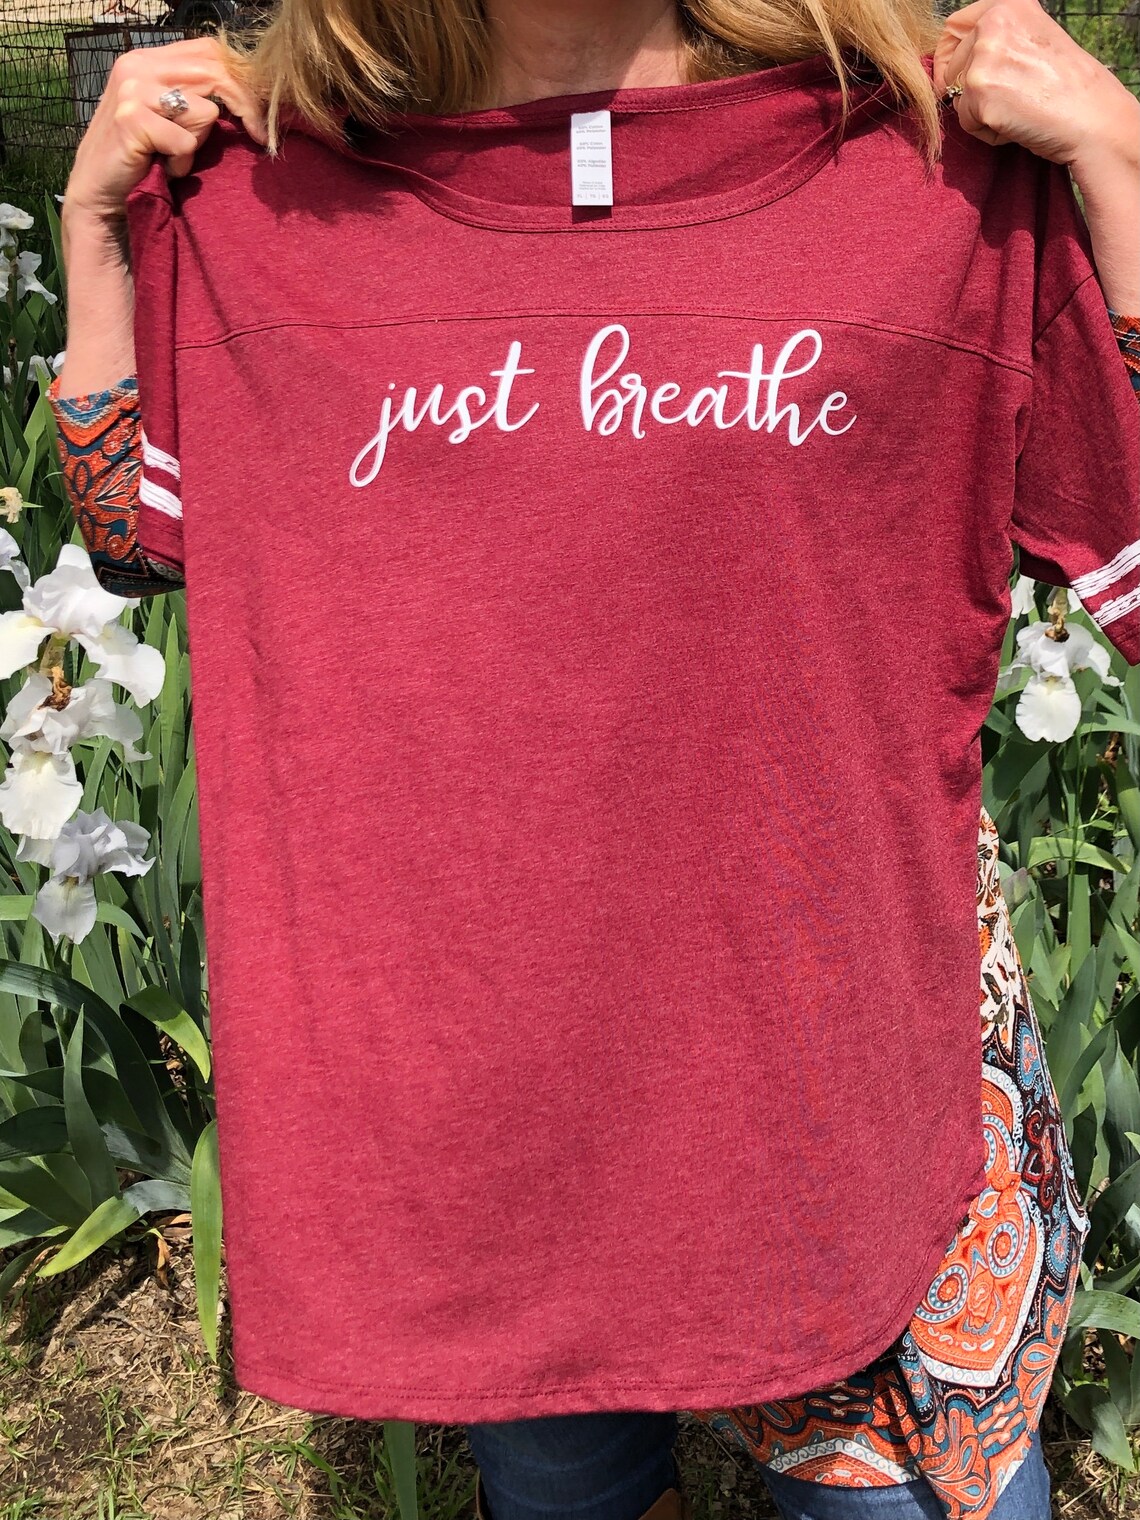 Just Breathe Graphic Tee/women's T-shirt/quote Shirt/short - Etsy